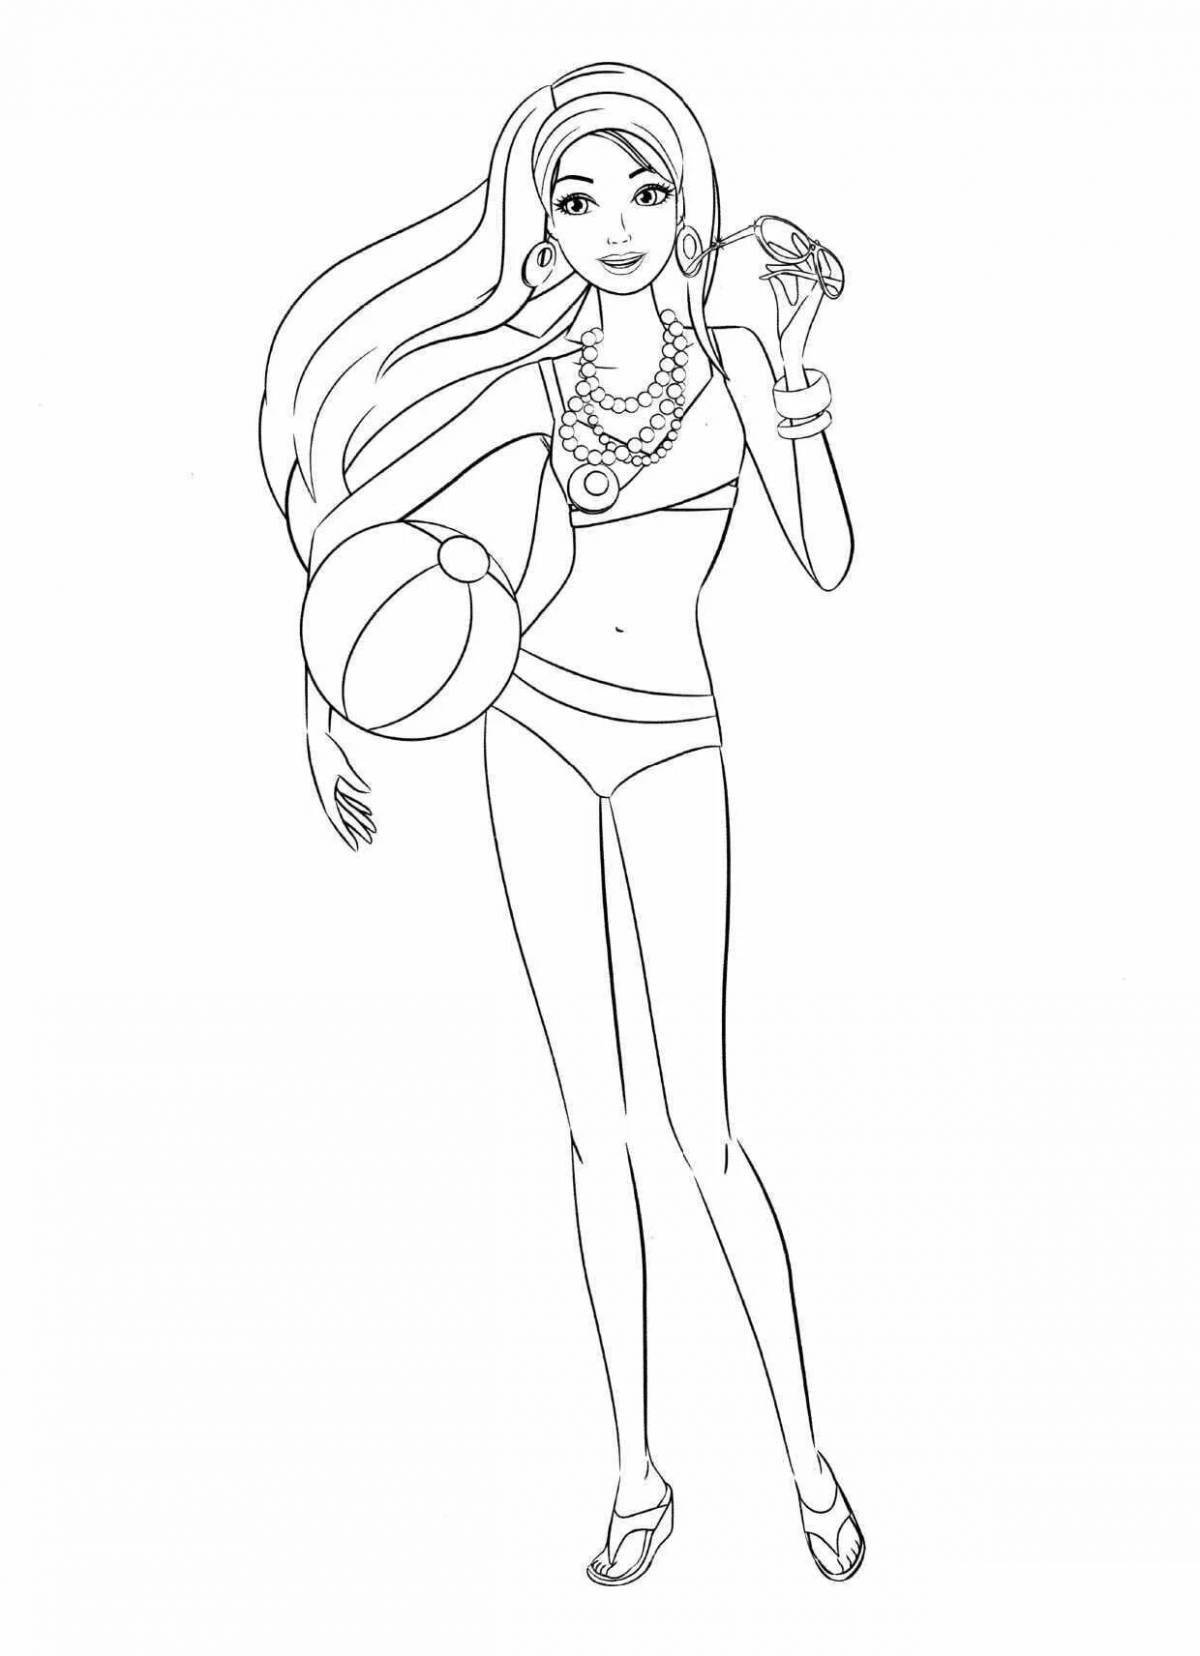 Coloring page gorgeous barbie in a bathing suit